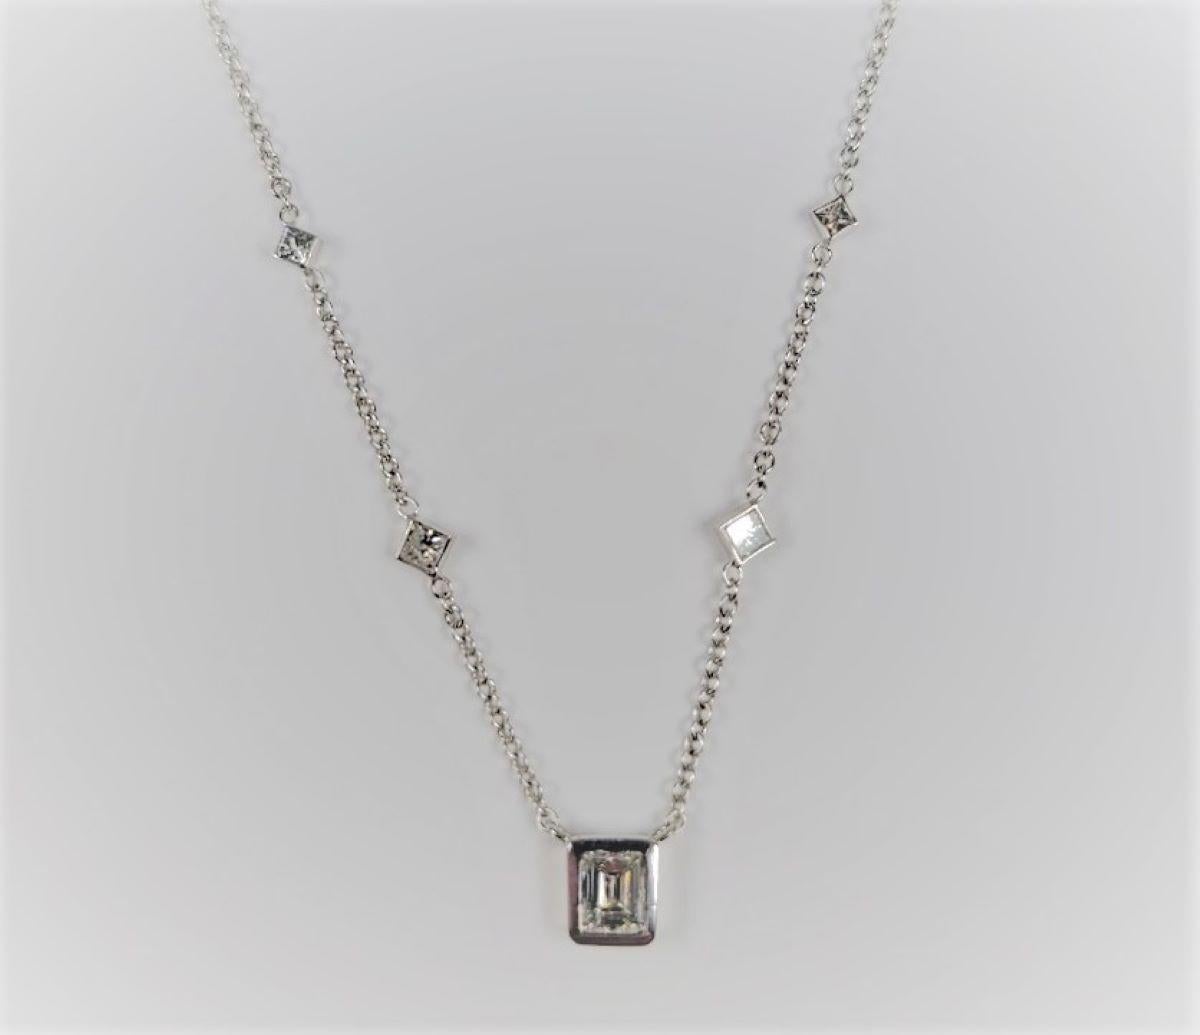 In 14 karat white gold, this beautiful station necklace supports a total of 1.29 carats of bezel-set diamonds. 